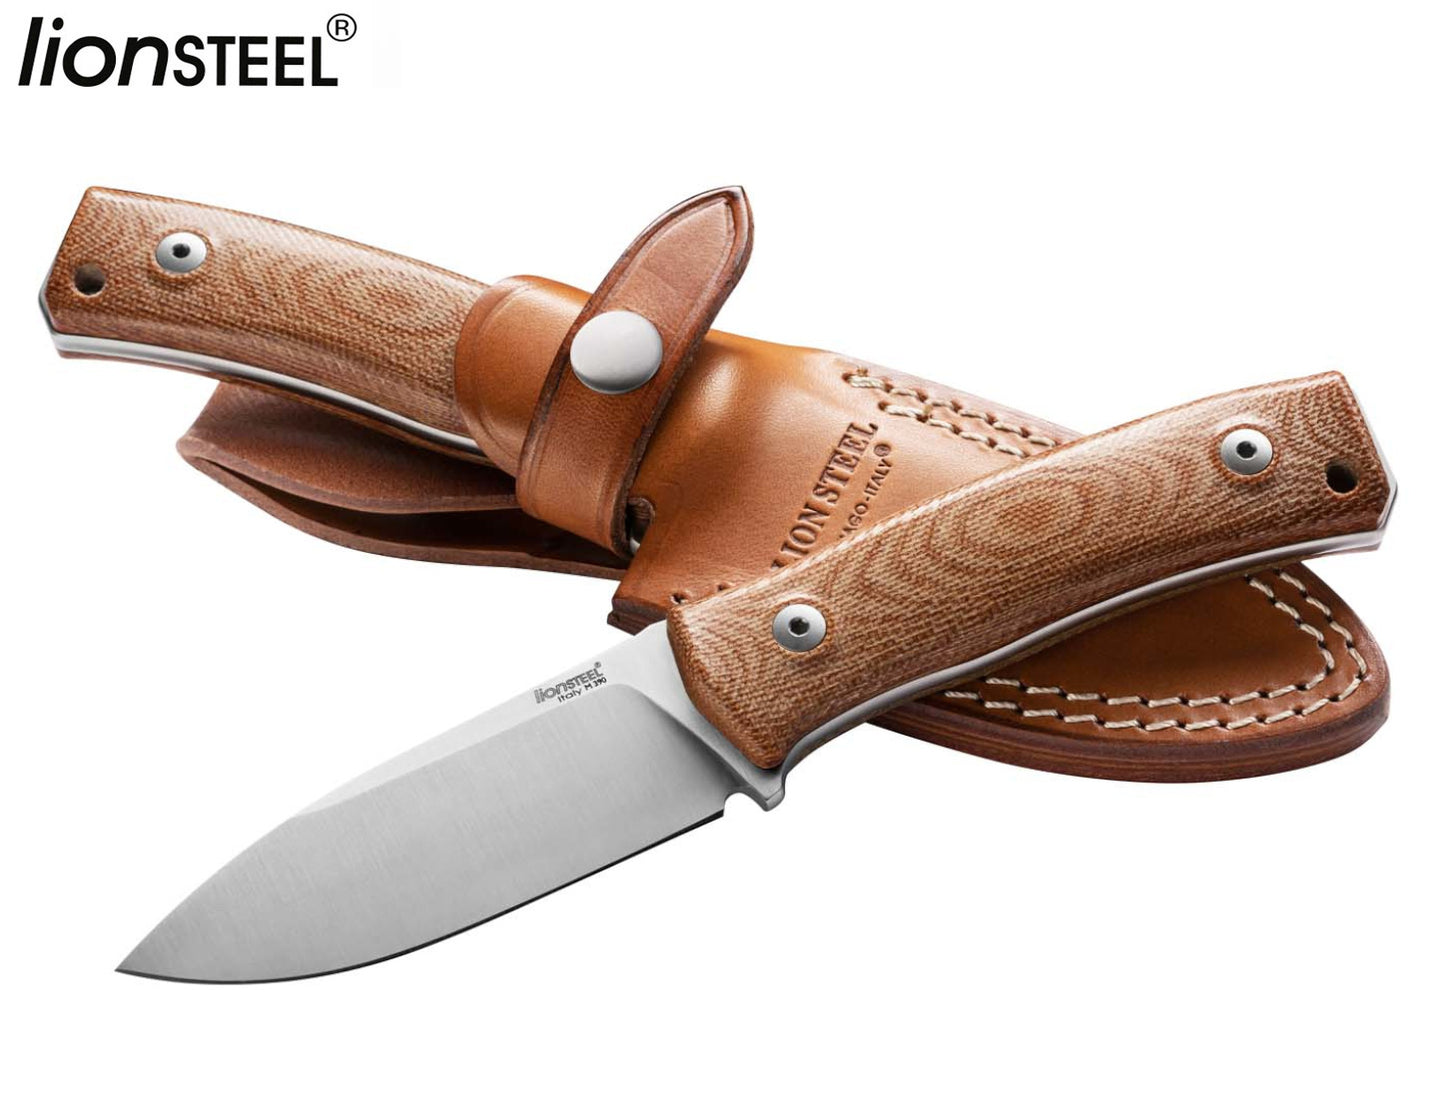 LionSteel M4 3.74" M390 Natural Canvas Micarta Fixed Blade Knife with Leather Sheath